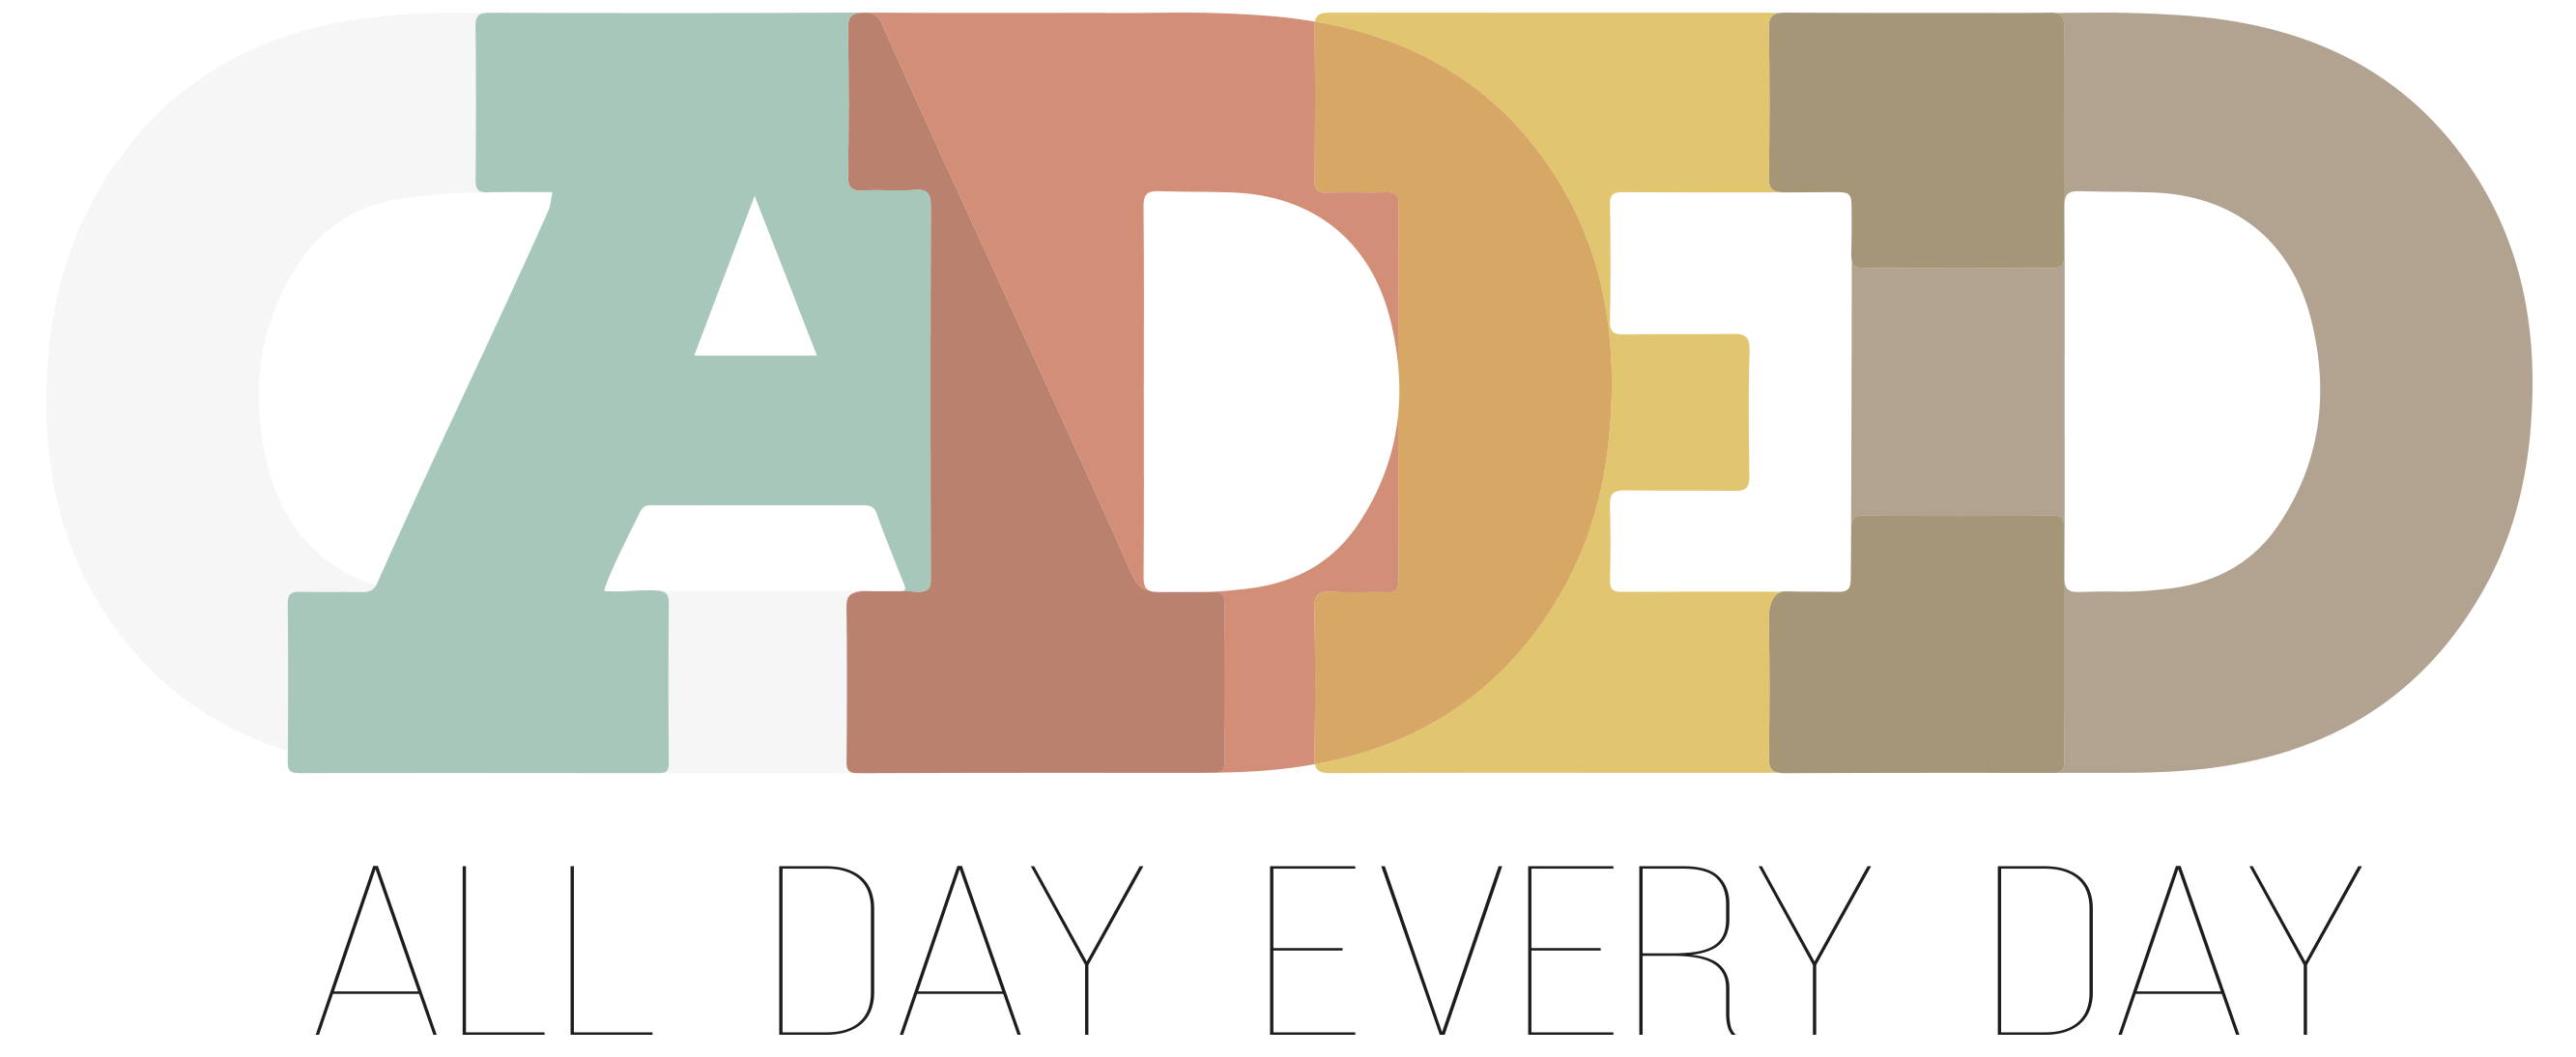 ADED- All Day every Day 